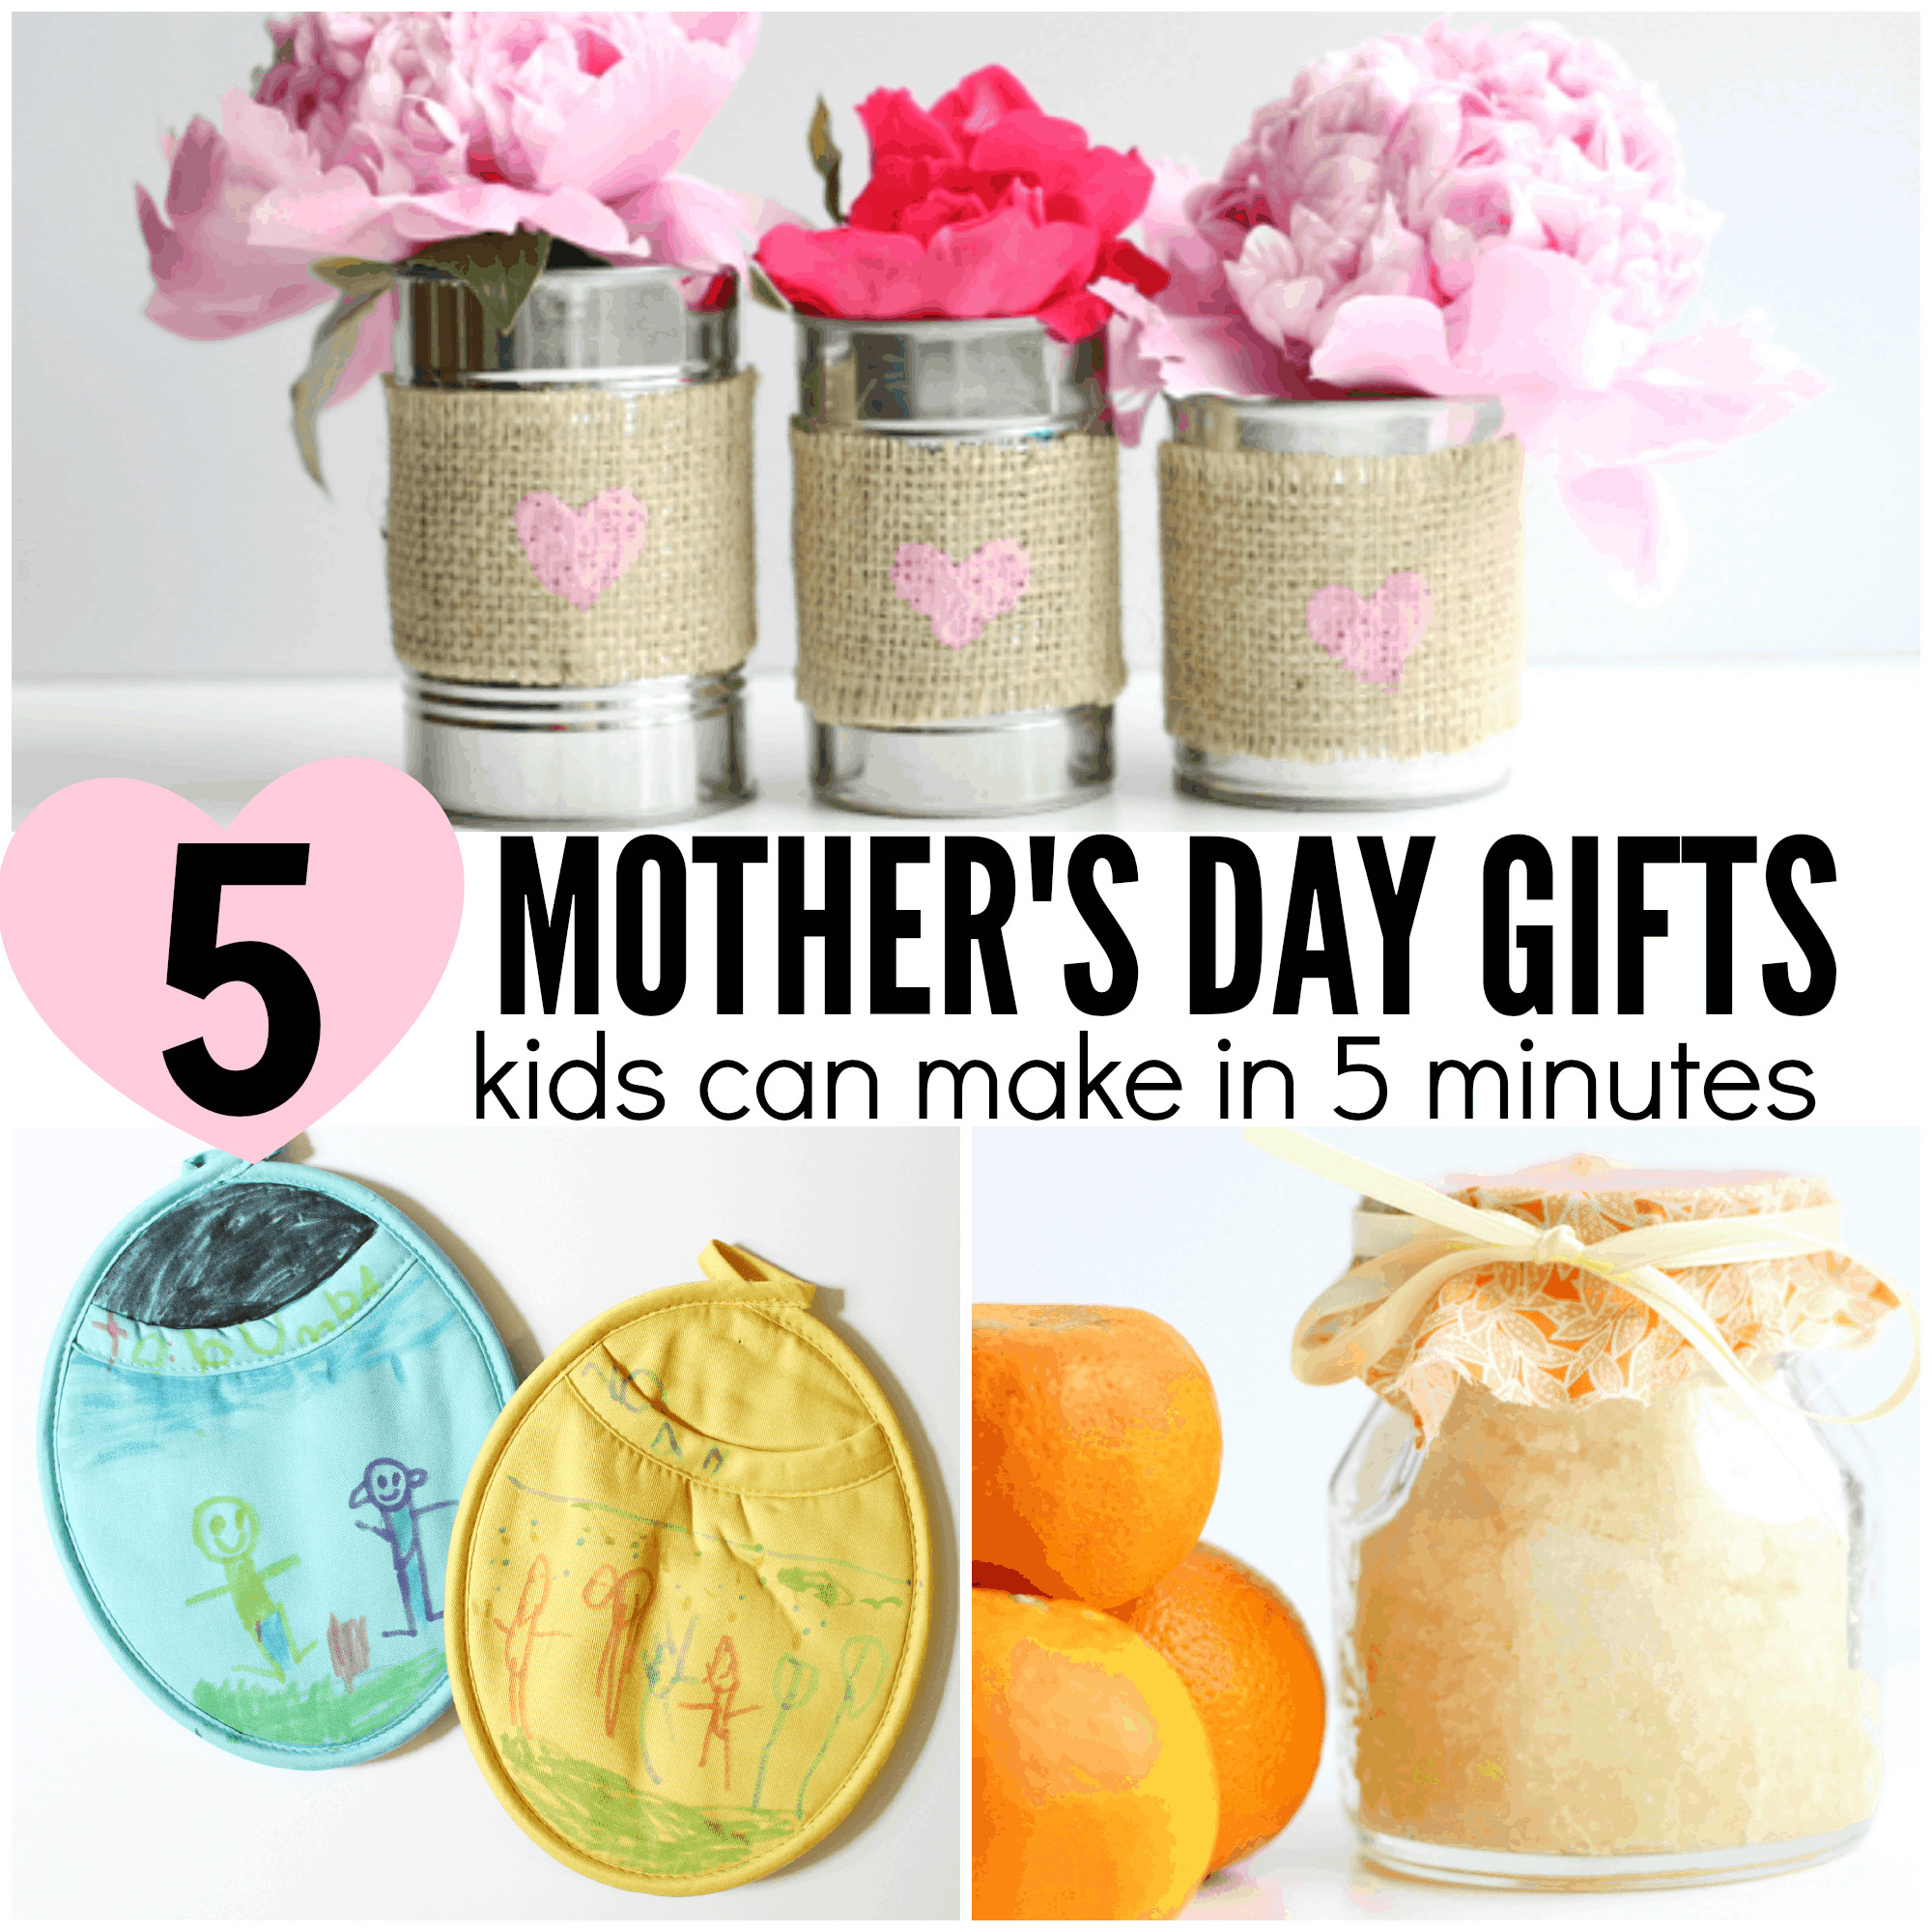 Mothers Day Gifts Ideas To Make
 5 Mother s Day Gifts Preschoolers Can Make I Can Teach